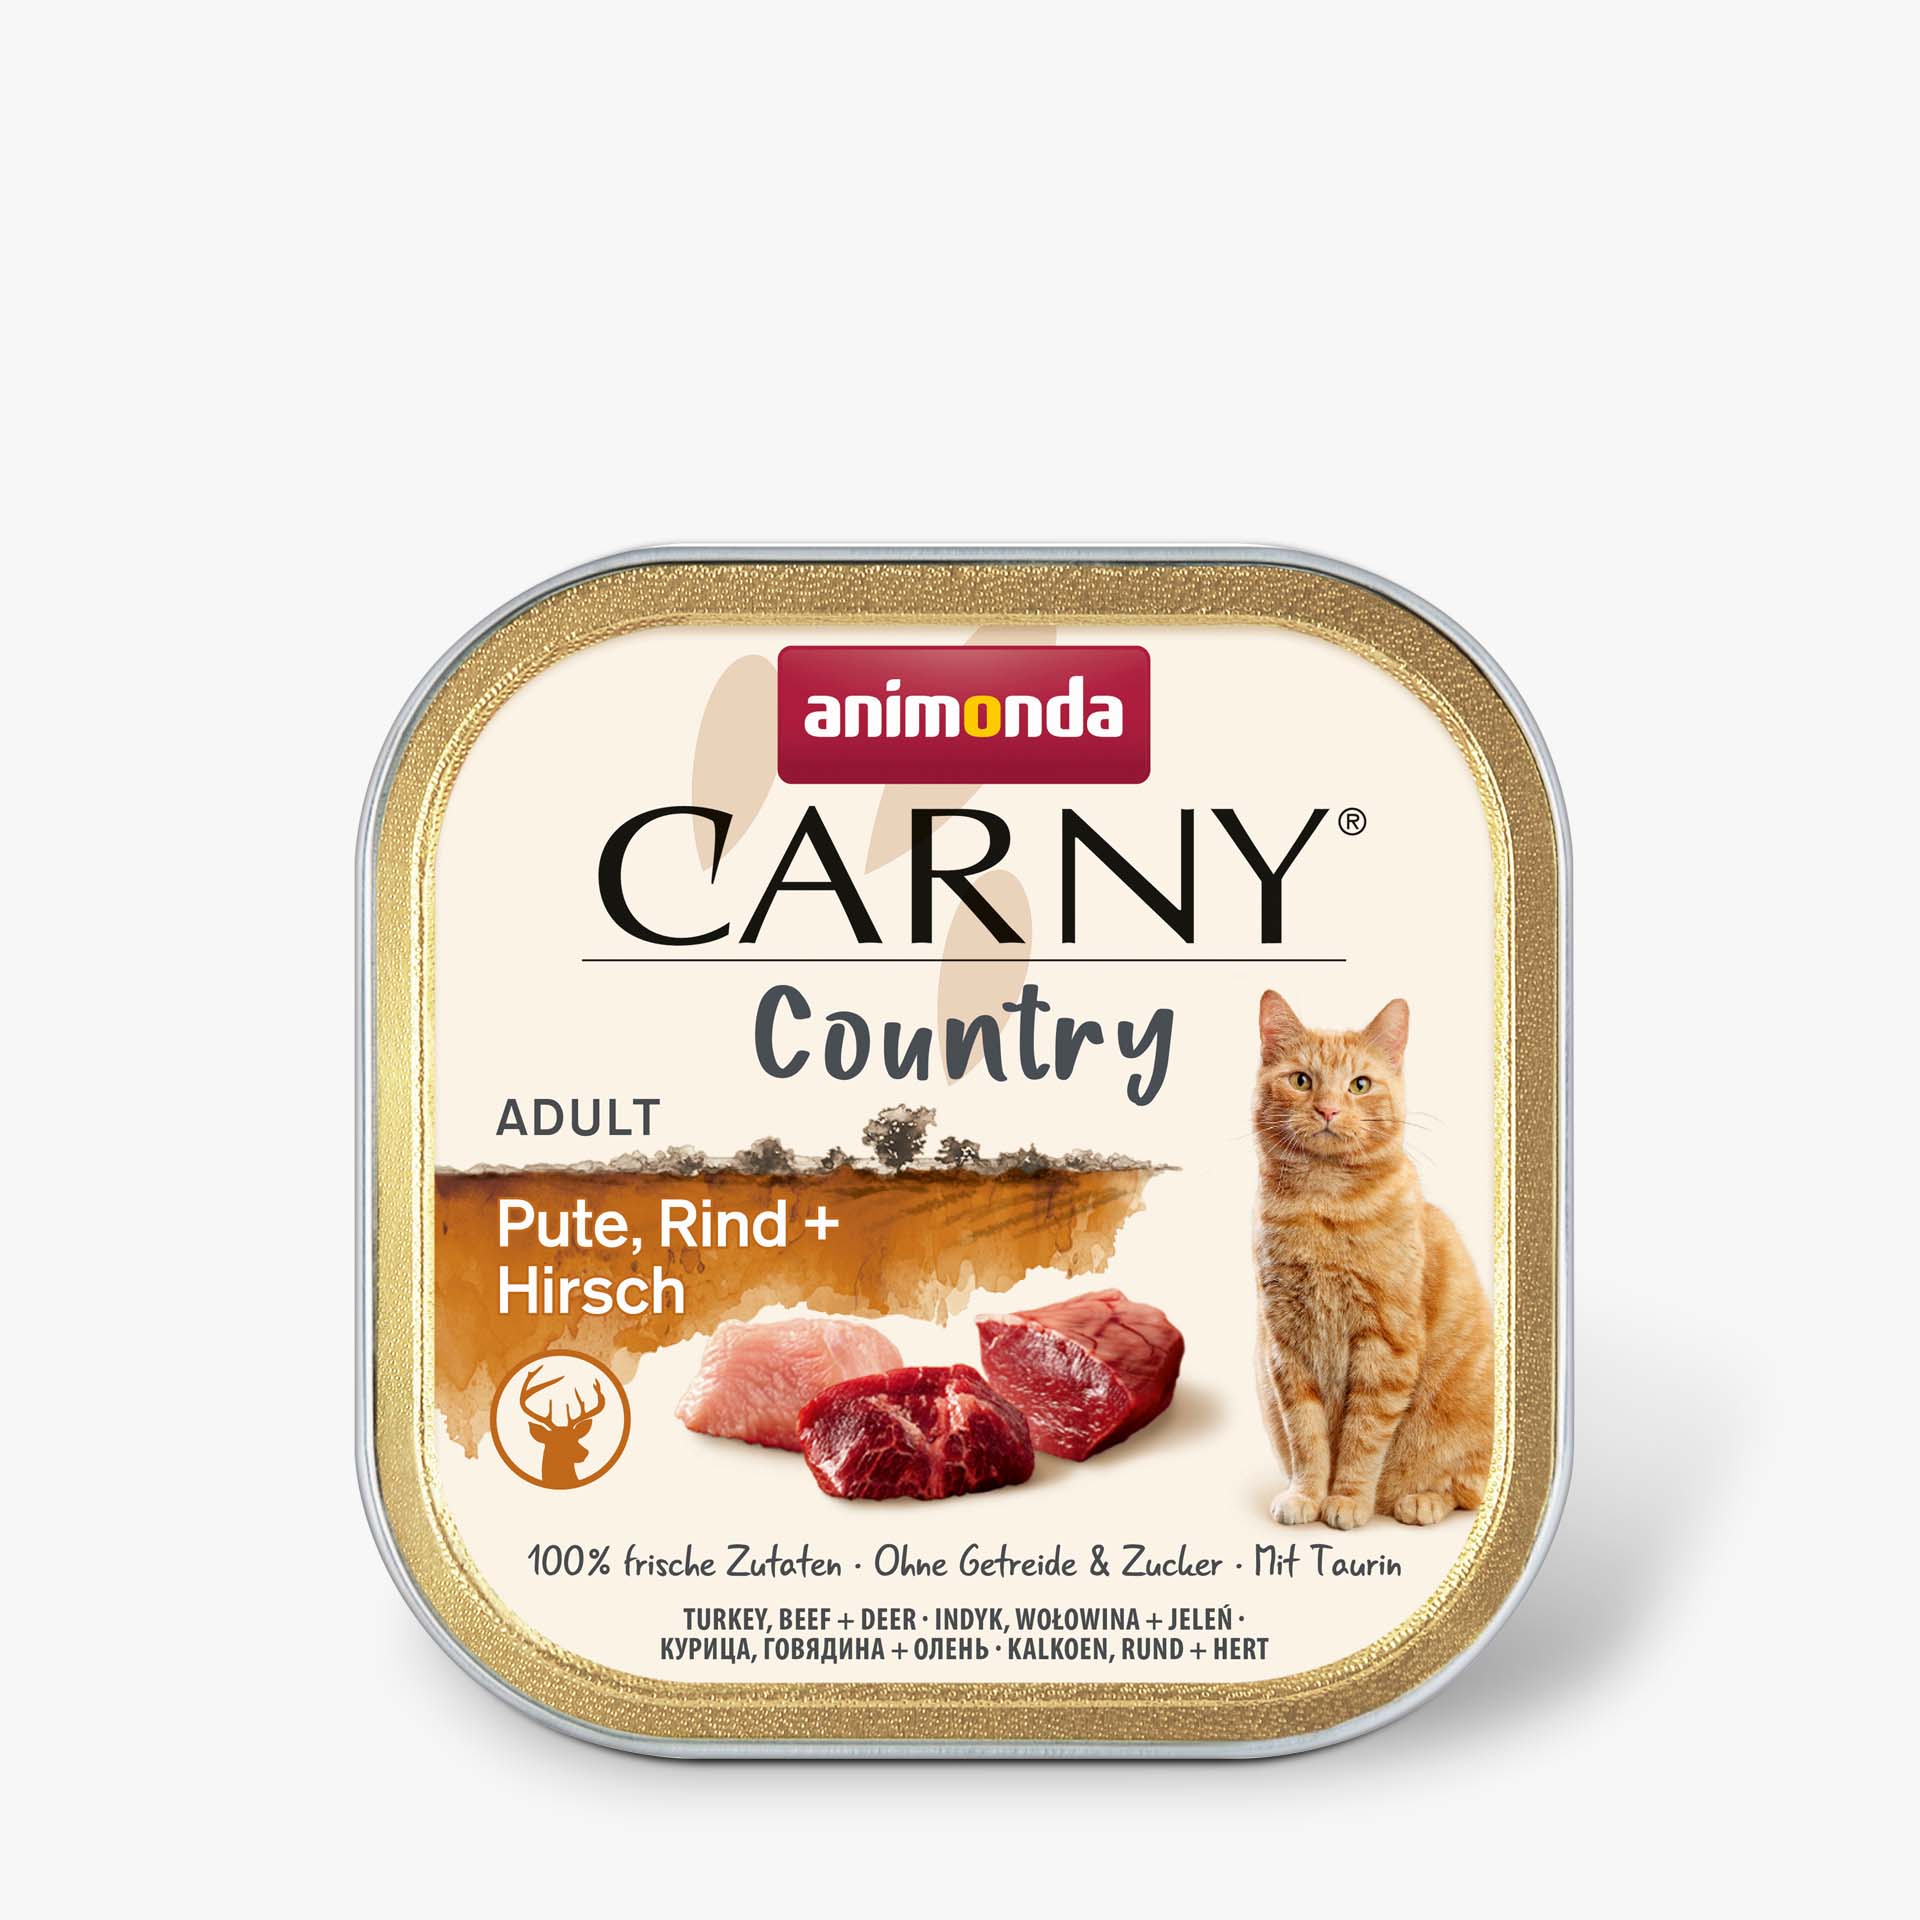 Carny Adult Country Pute, Rind + Hirsch